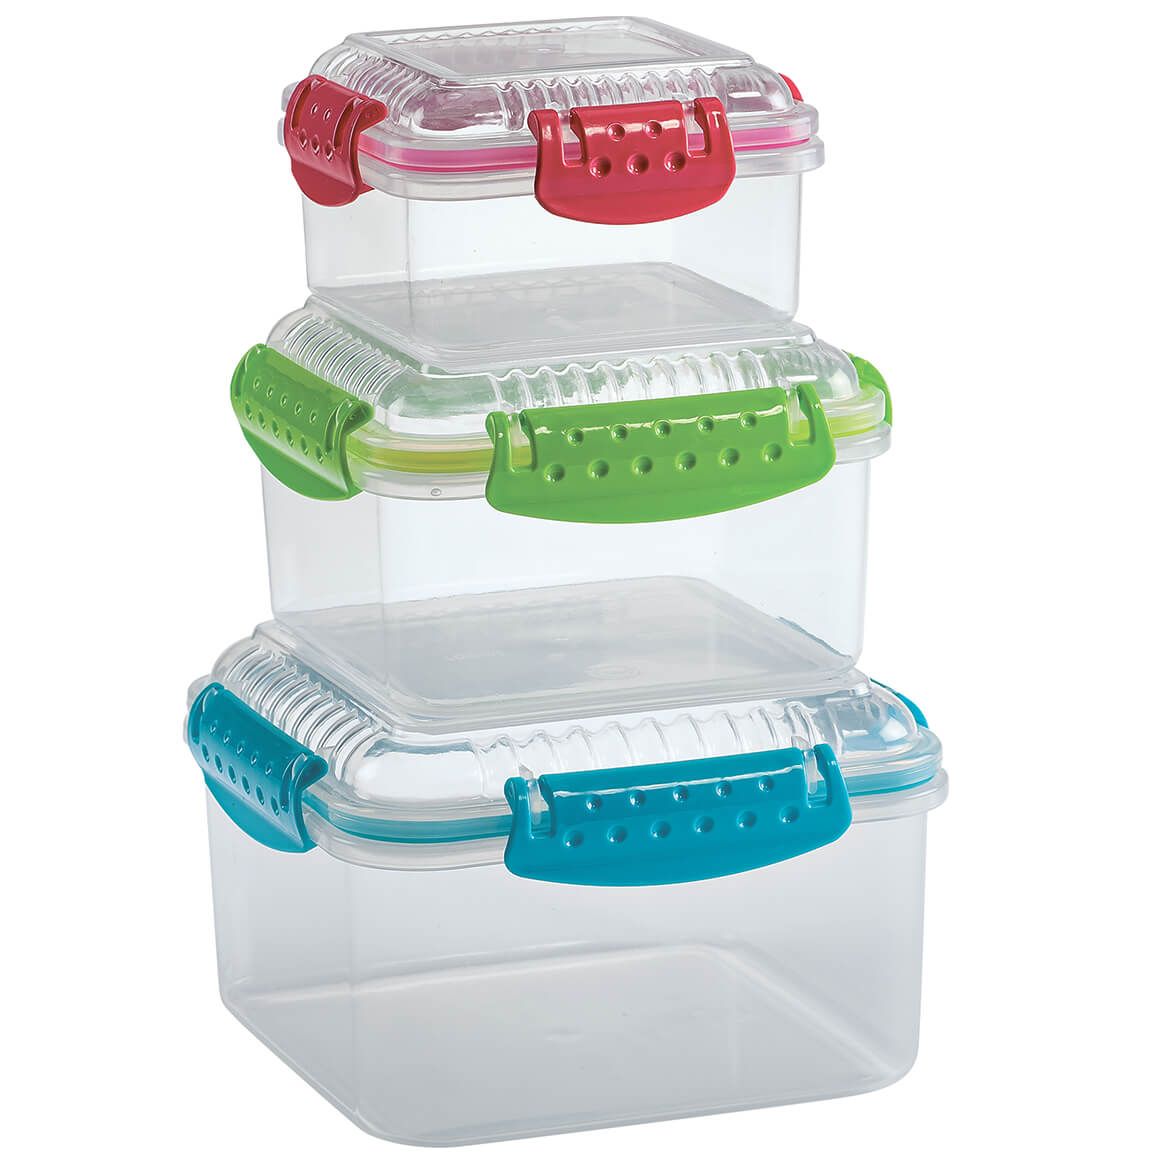 Locking Lunch Containers by Chef's Pride, Set of 3 + '-' + 373553